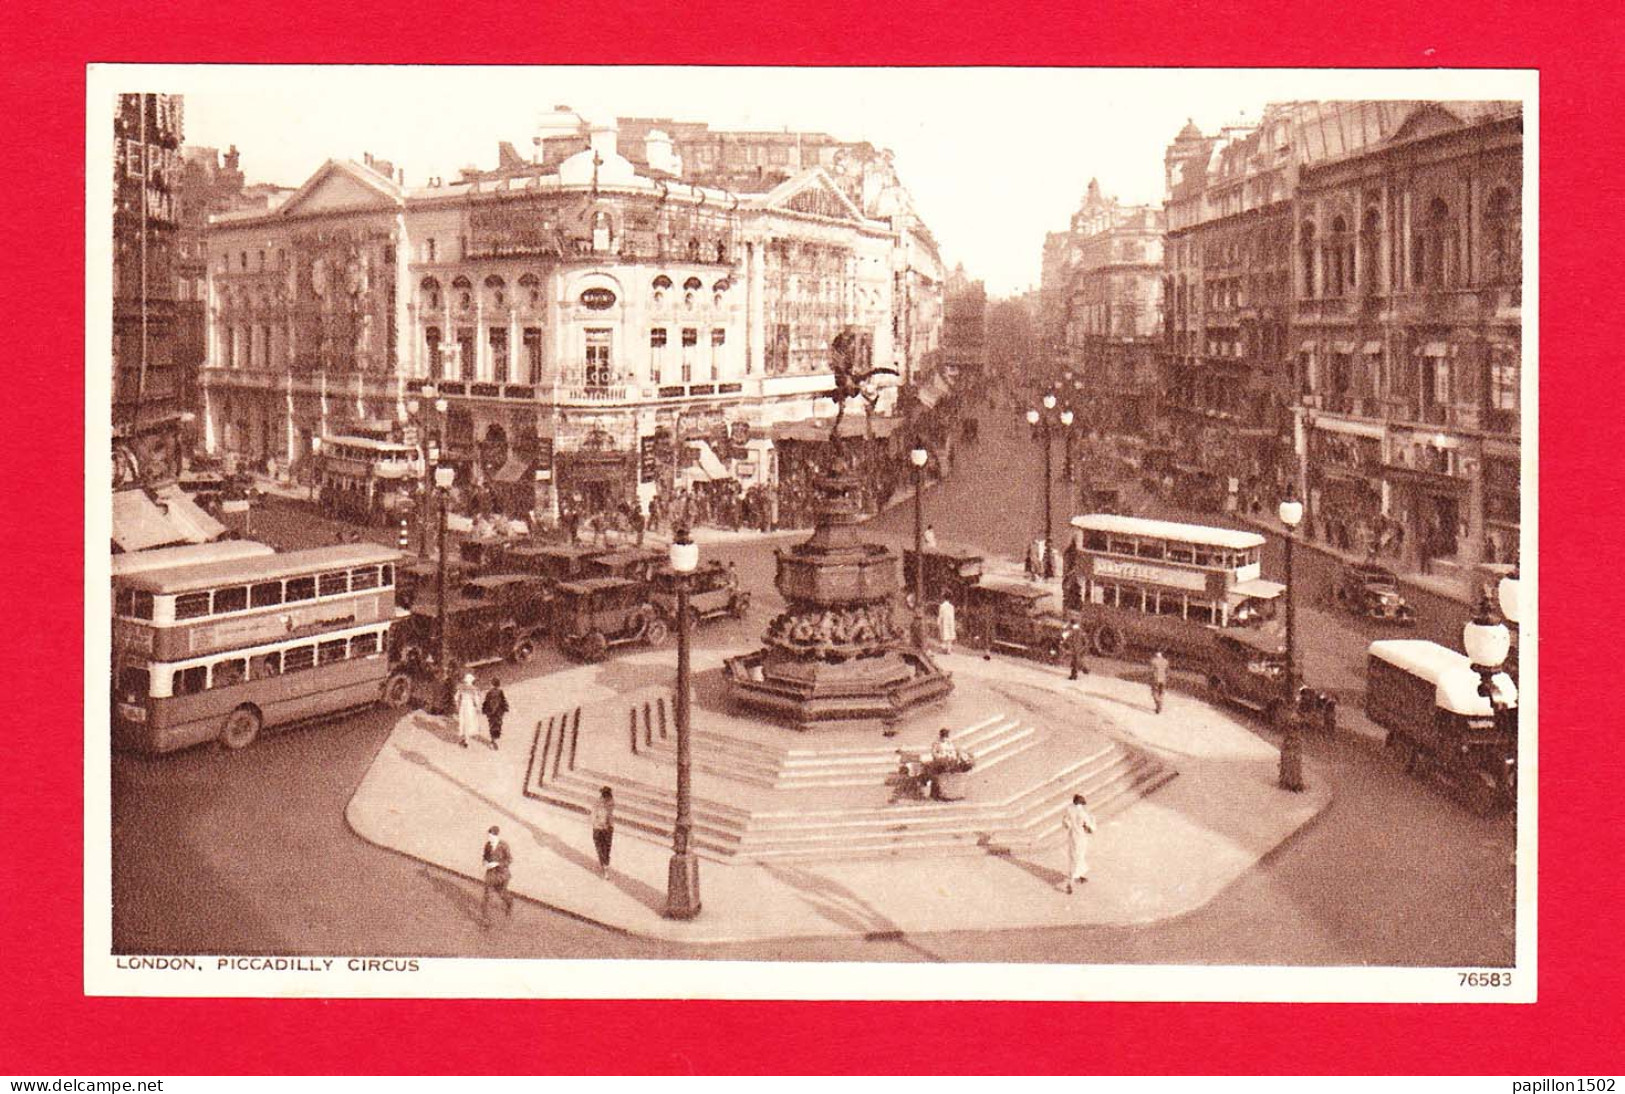 E-Royaume Uni-205PH10 LONDON, Piccadilly Circus, Voir Les Vieilles Voitures Et Autobus, Cpa BE - Piccadilly Circus